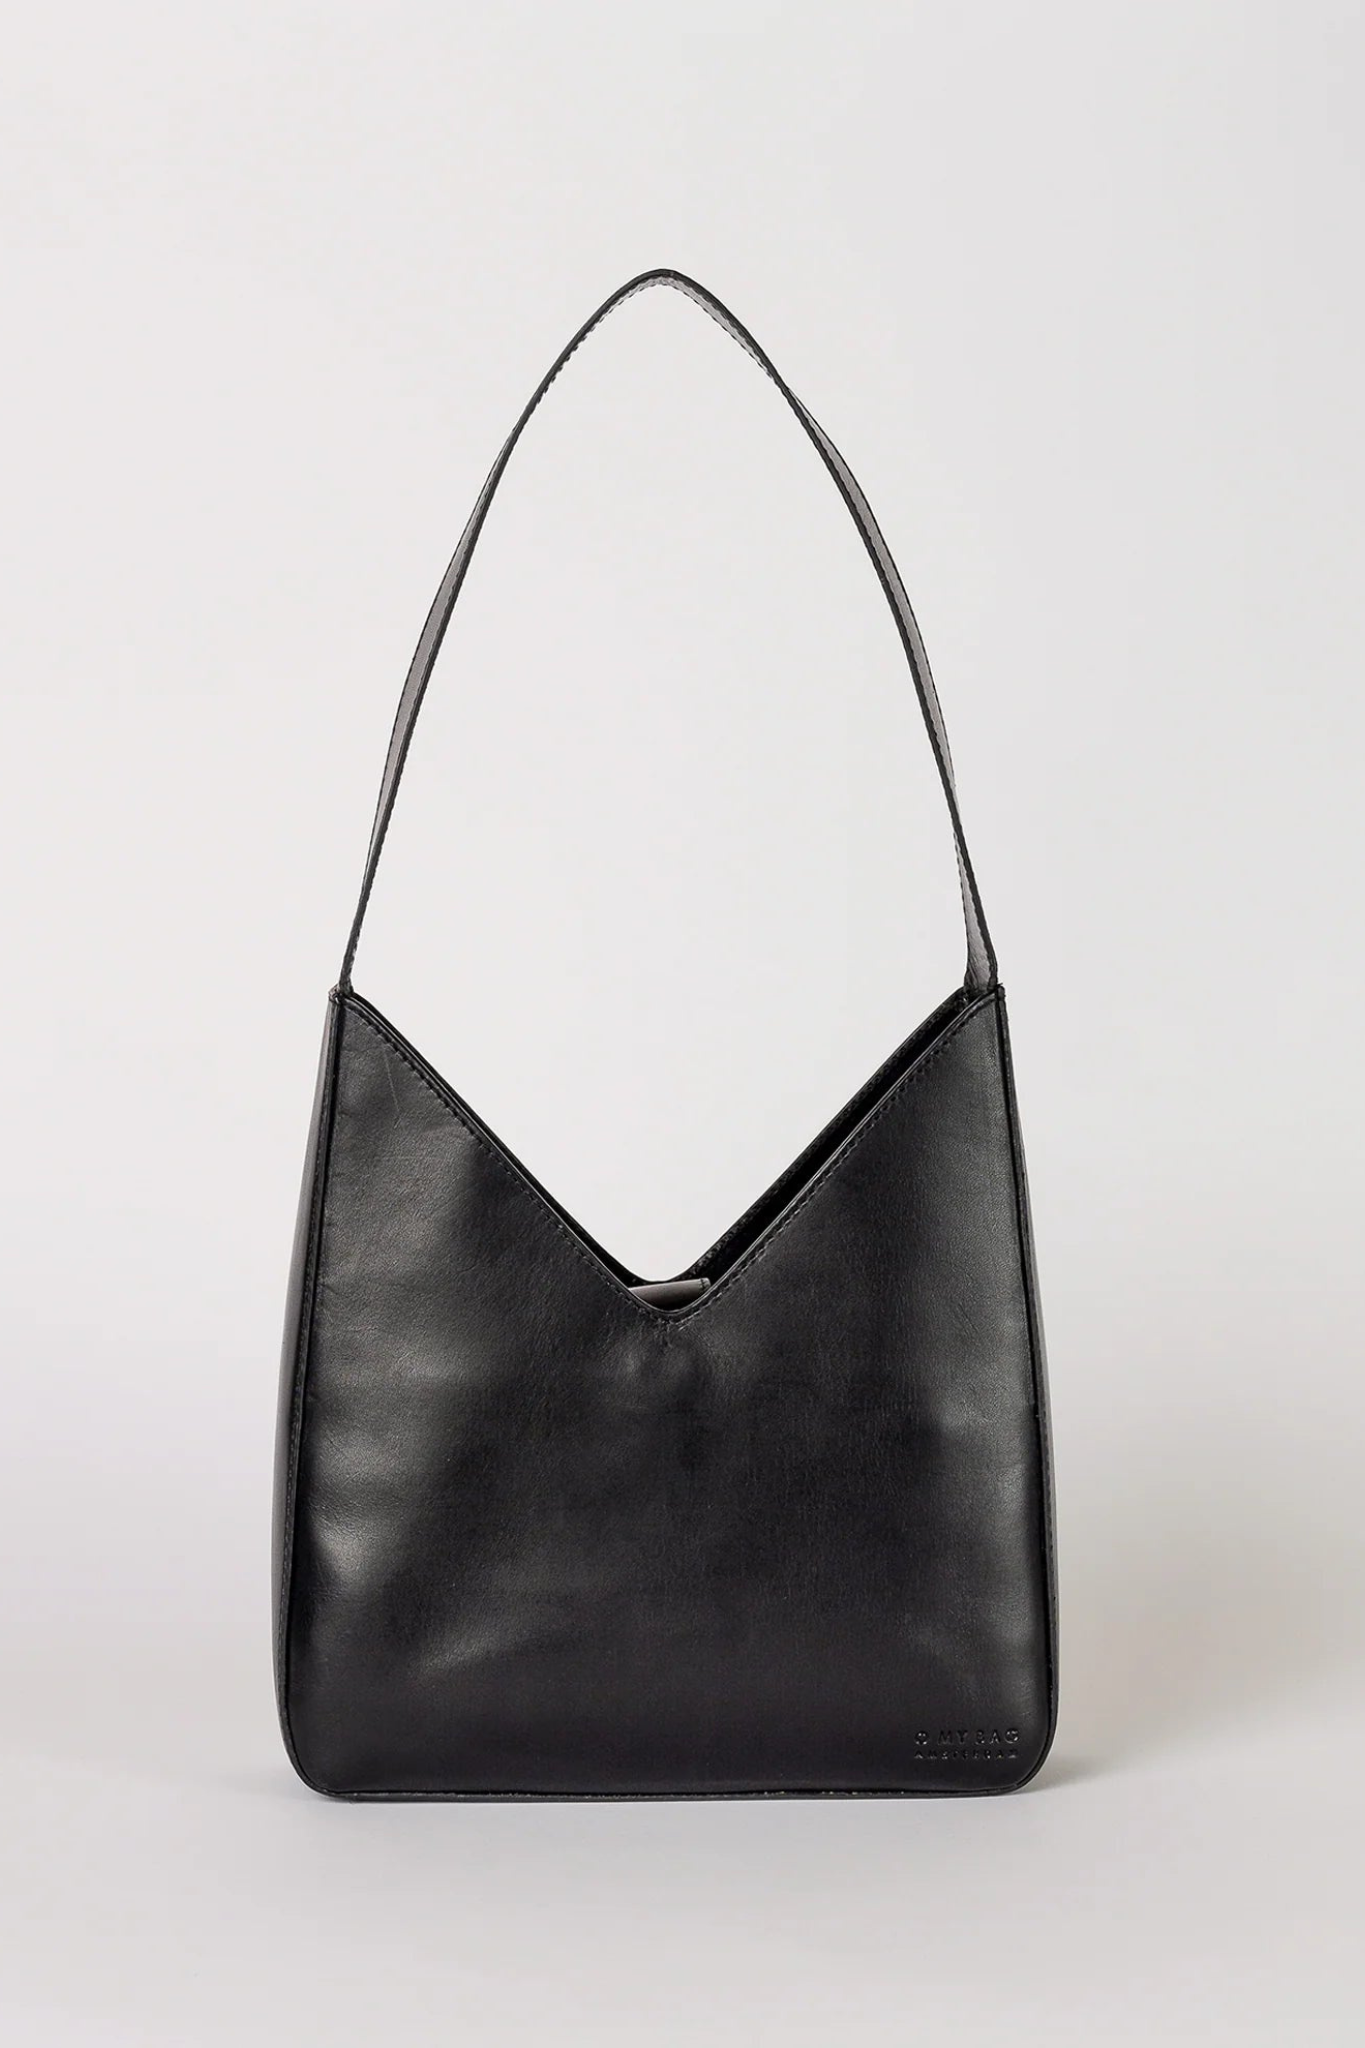 VICKY BAG - BLACK CLASSIC LEATHER